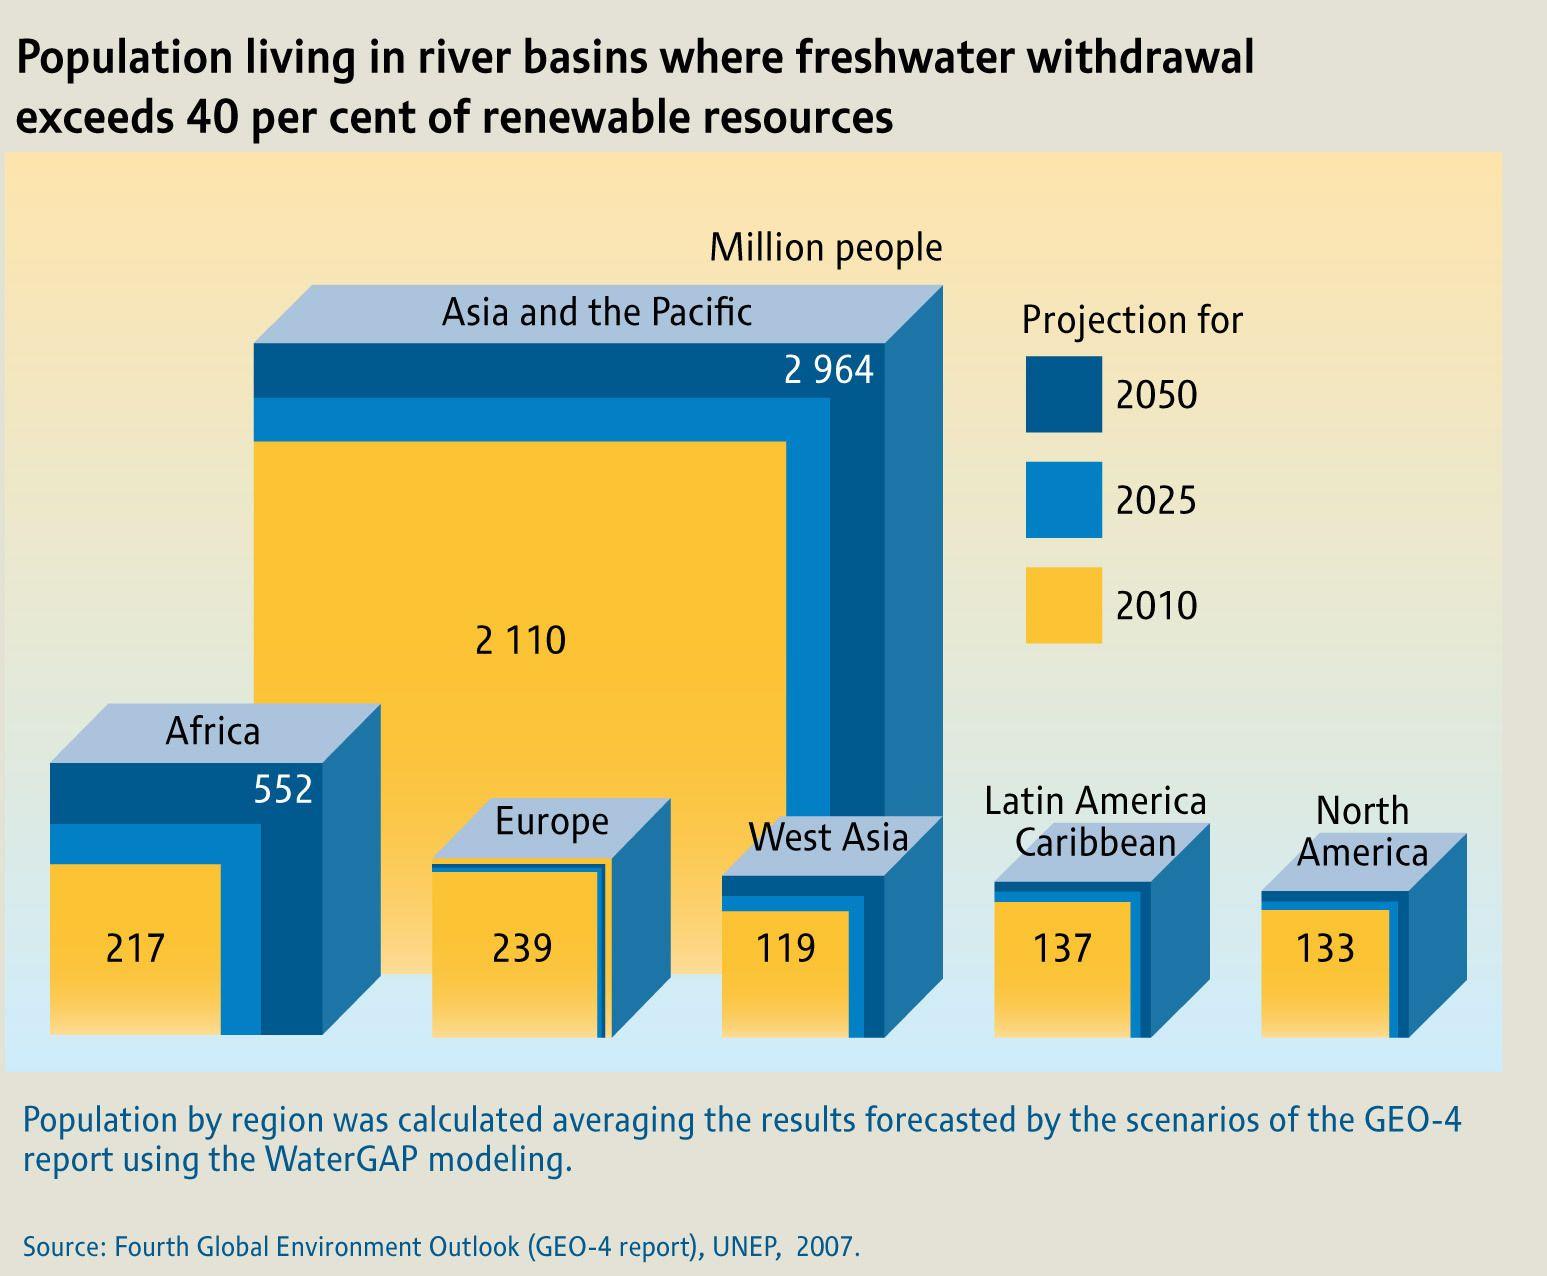 Population living in river basins where freshwater withdrawal exceeds 40 per cent of renewable resources